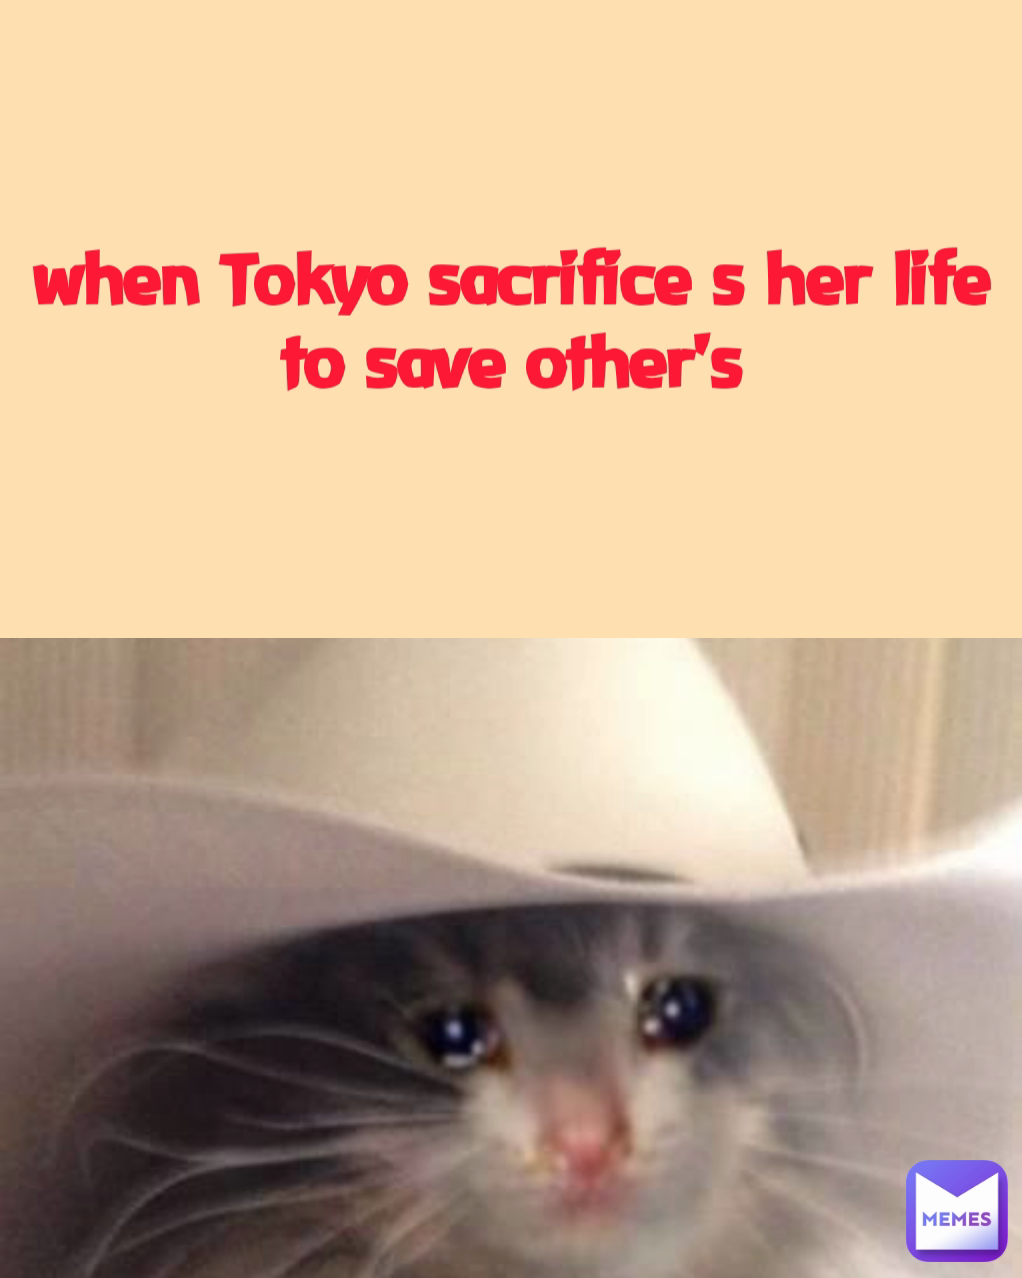 when Tokyo sacrifice s her life to save other's